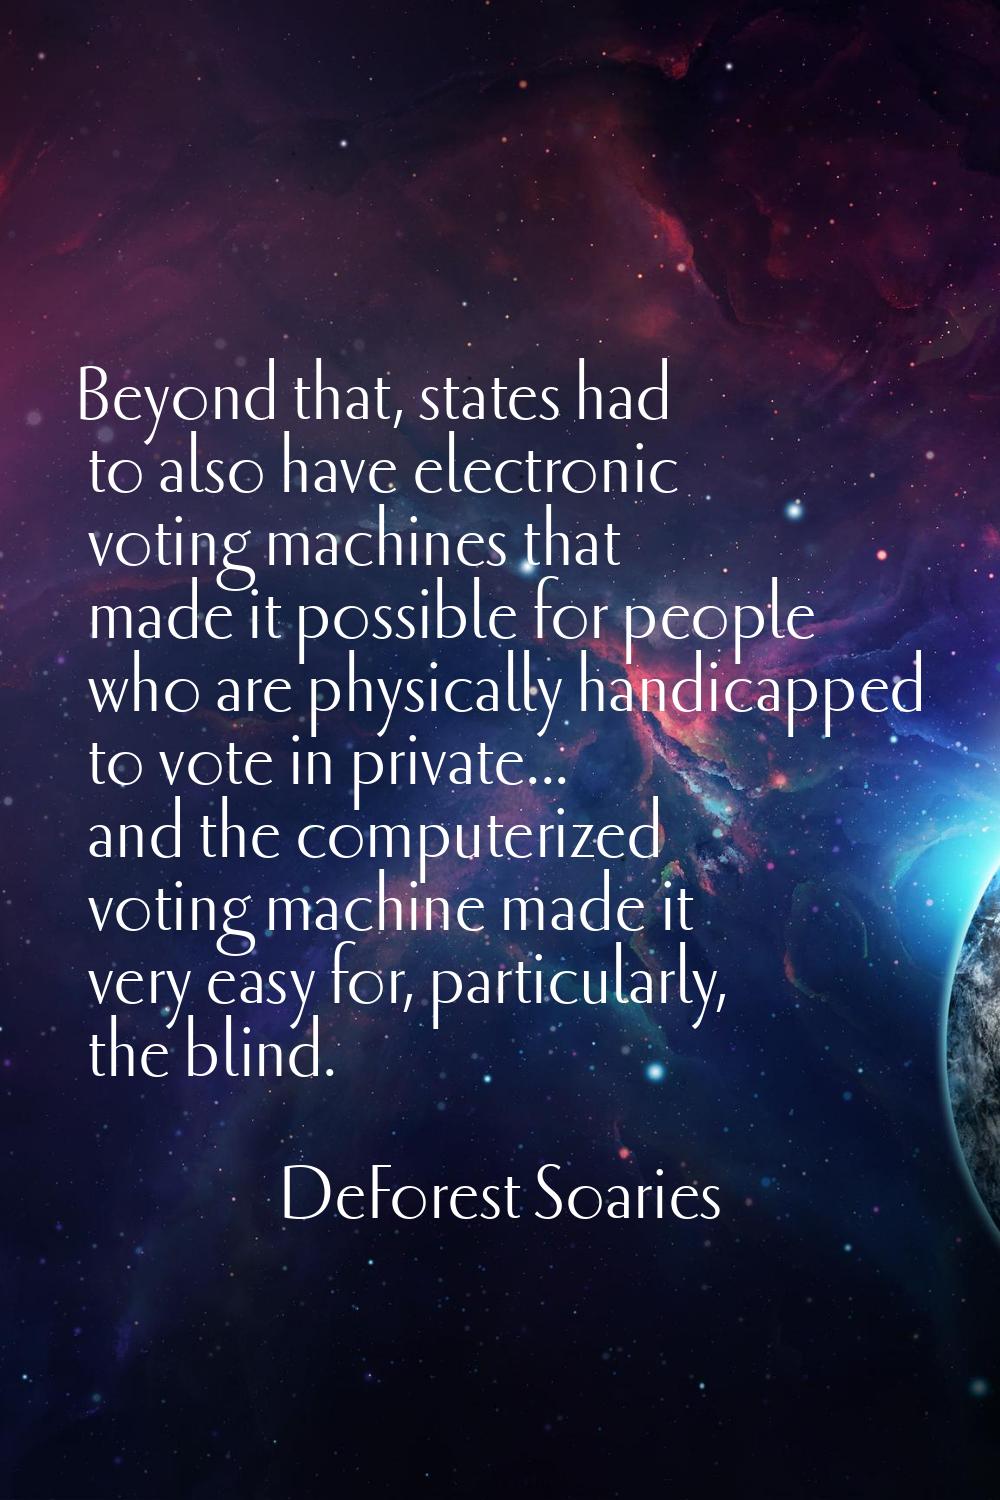 Beyond that, states had to also have electronic voting machines that made it possible for people wh